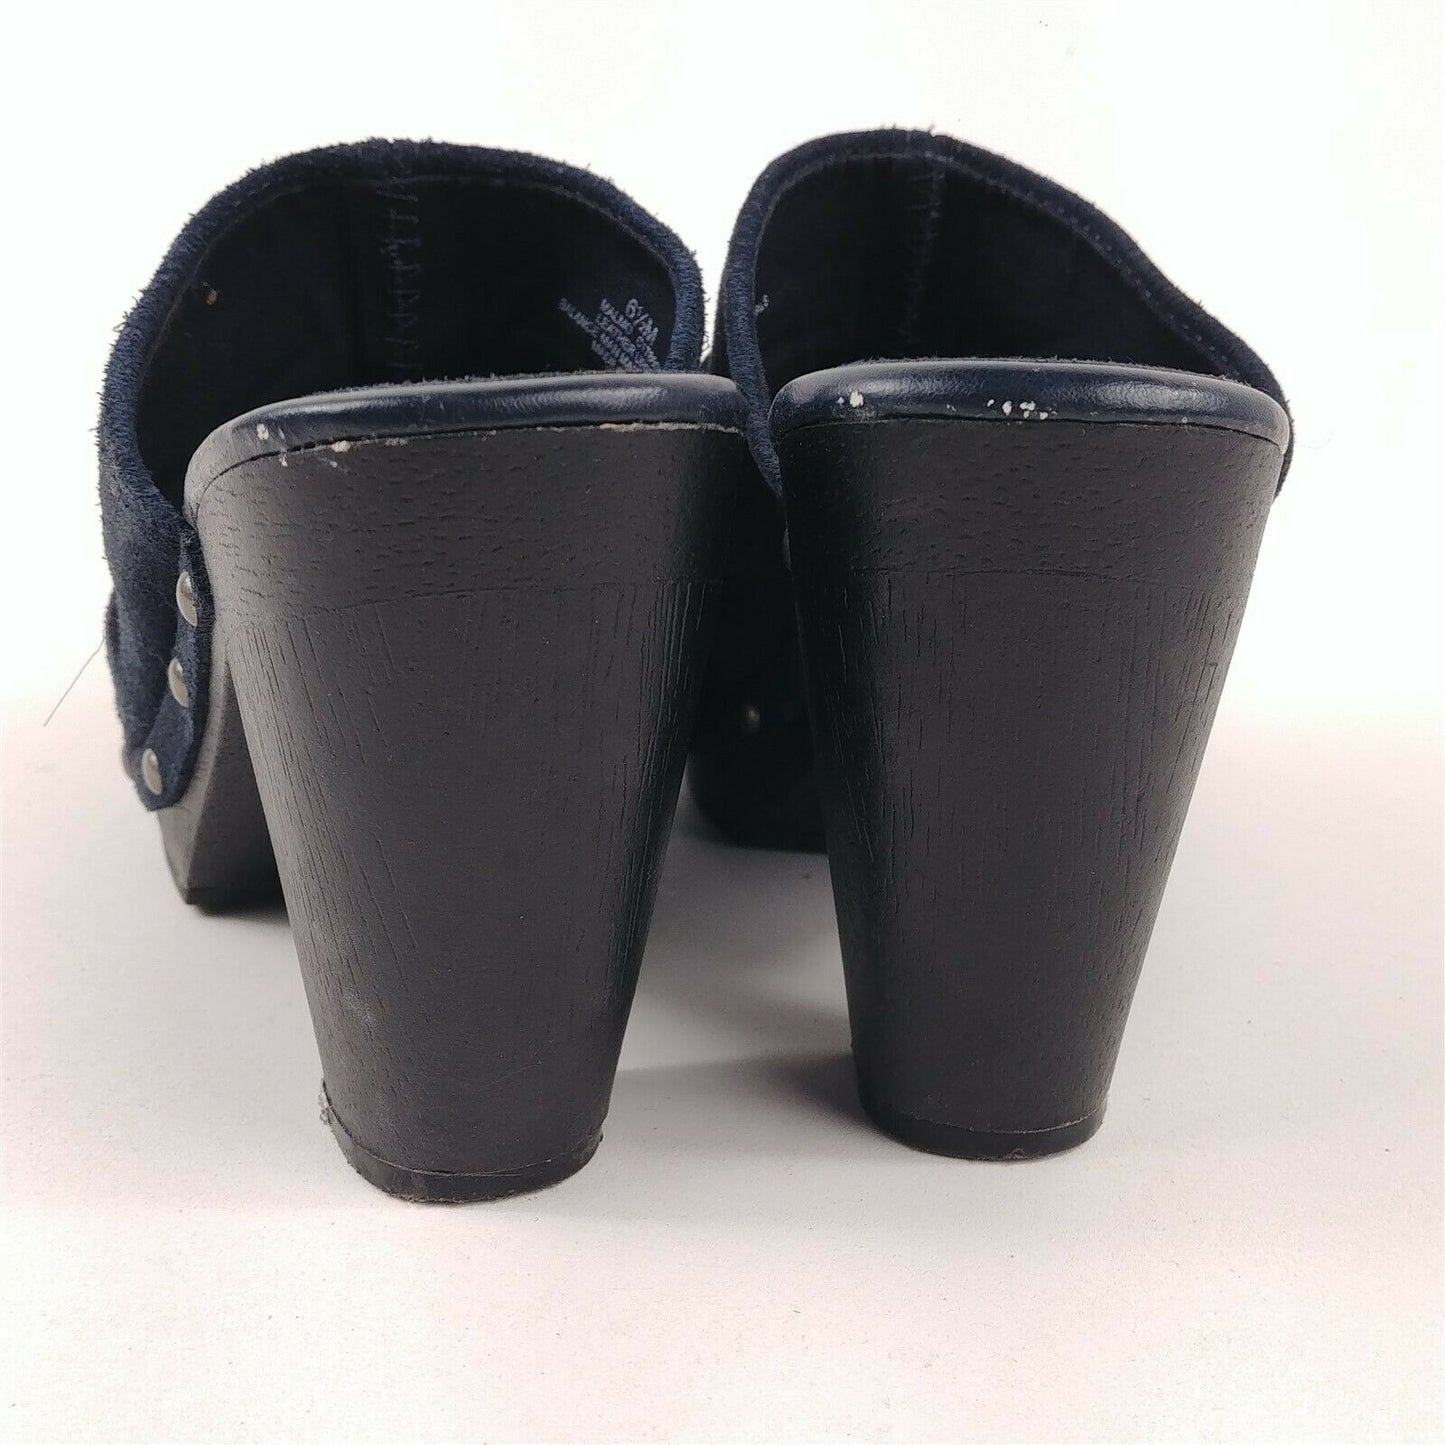 Mia Clogs Black Seude 2 1/2" Block Heel Rouched & Stud Detail Womens Size 6.5